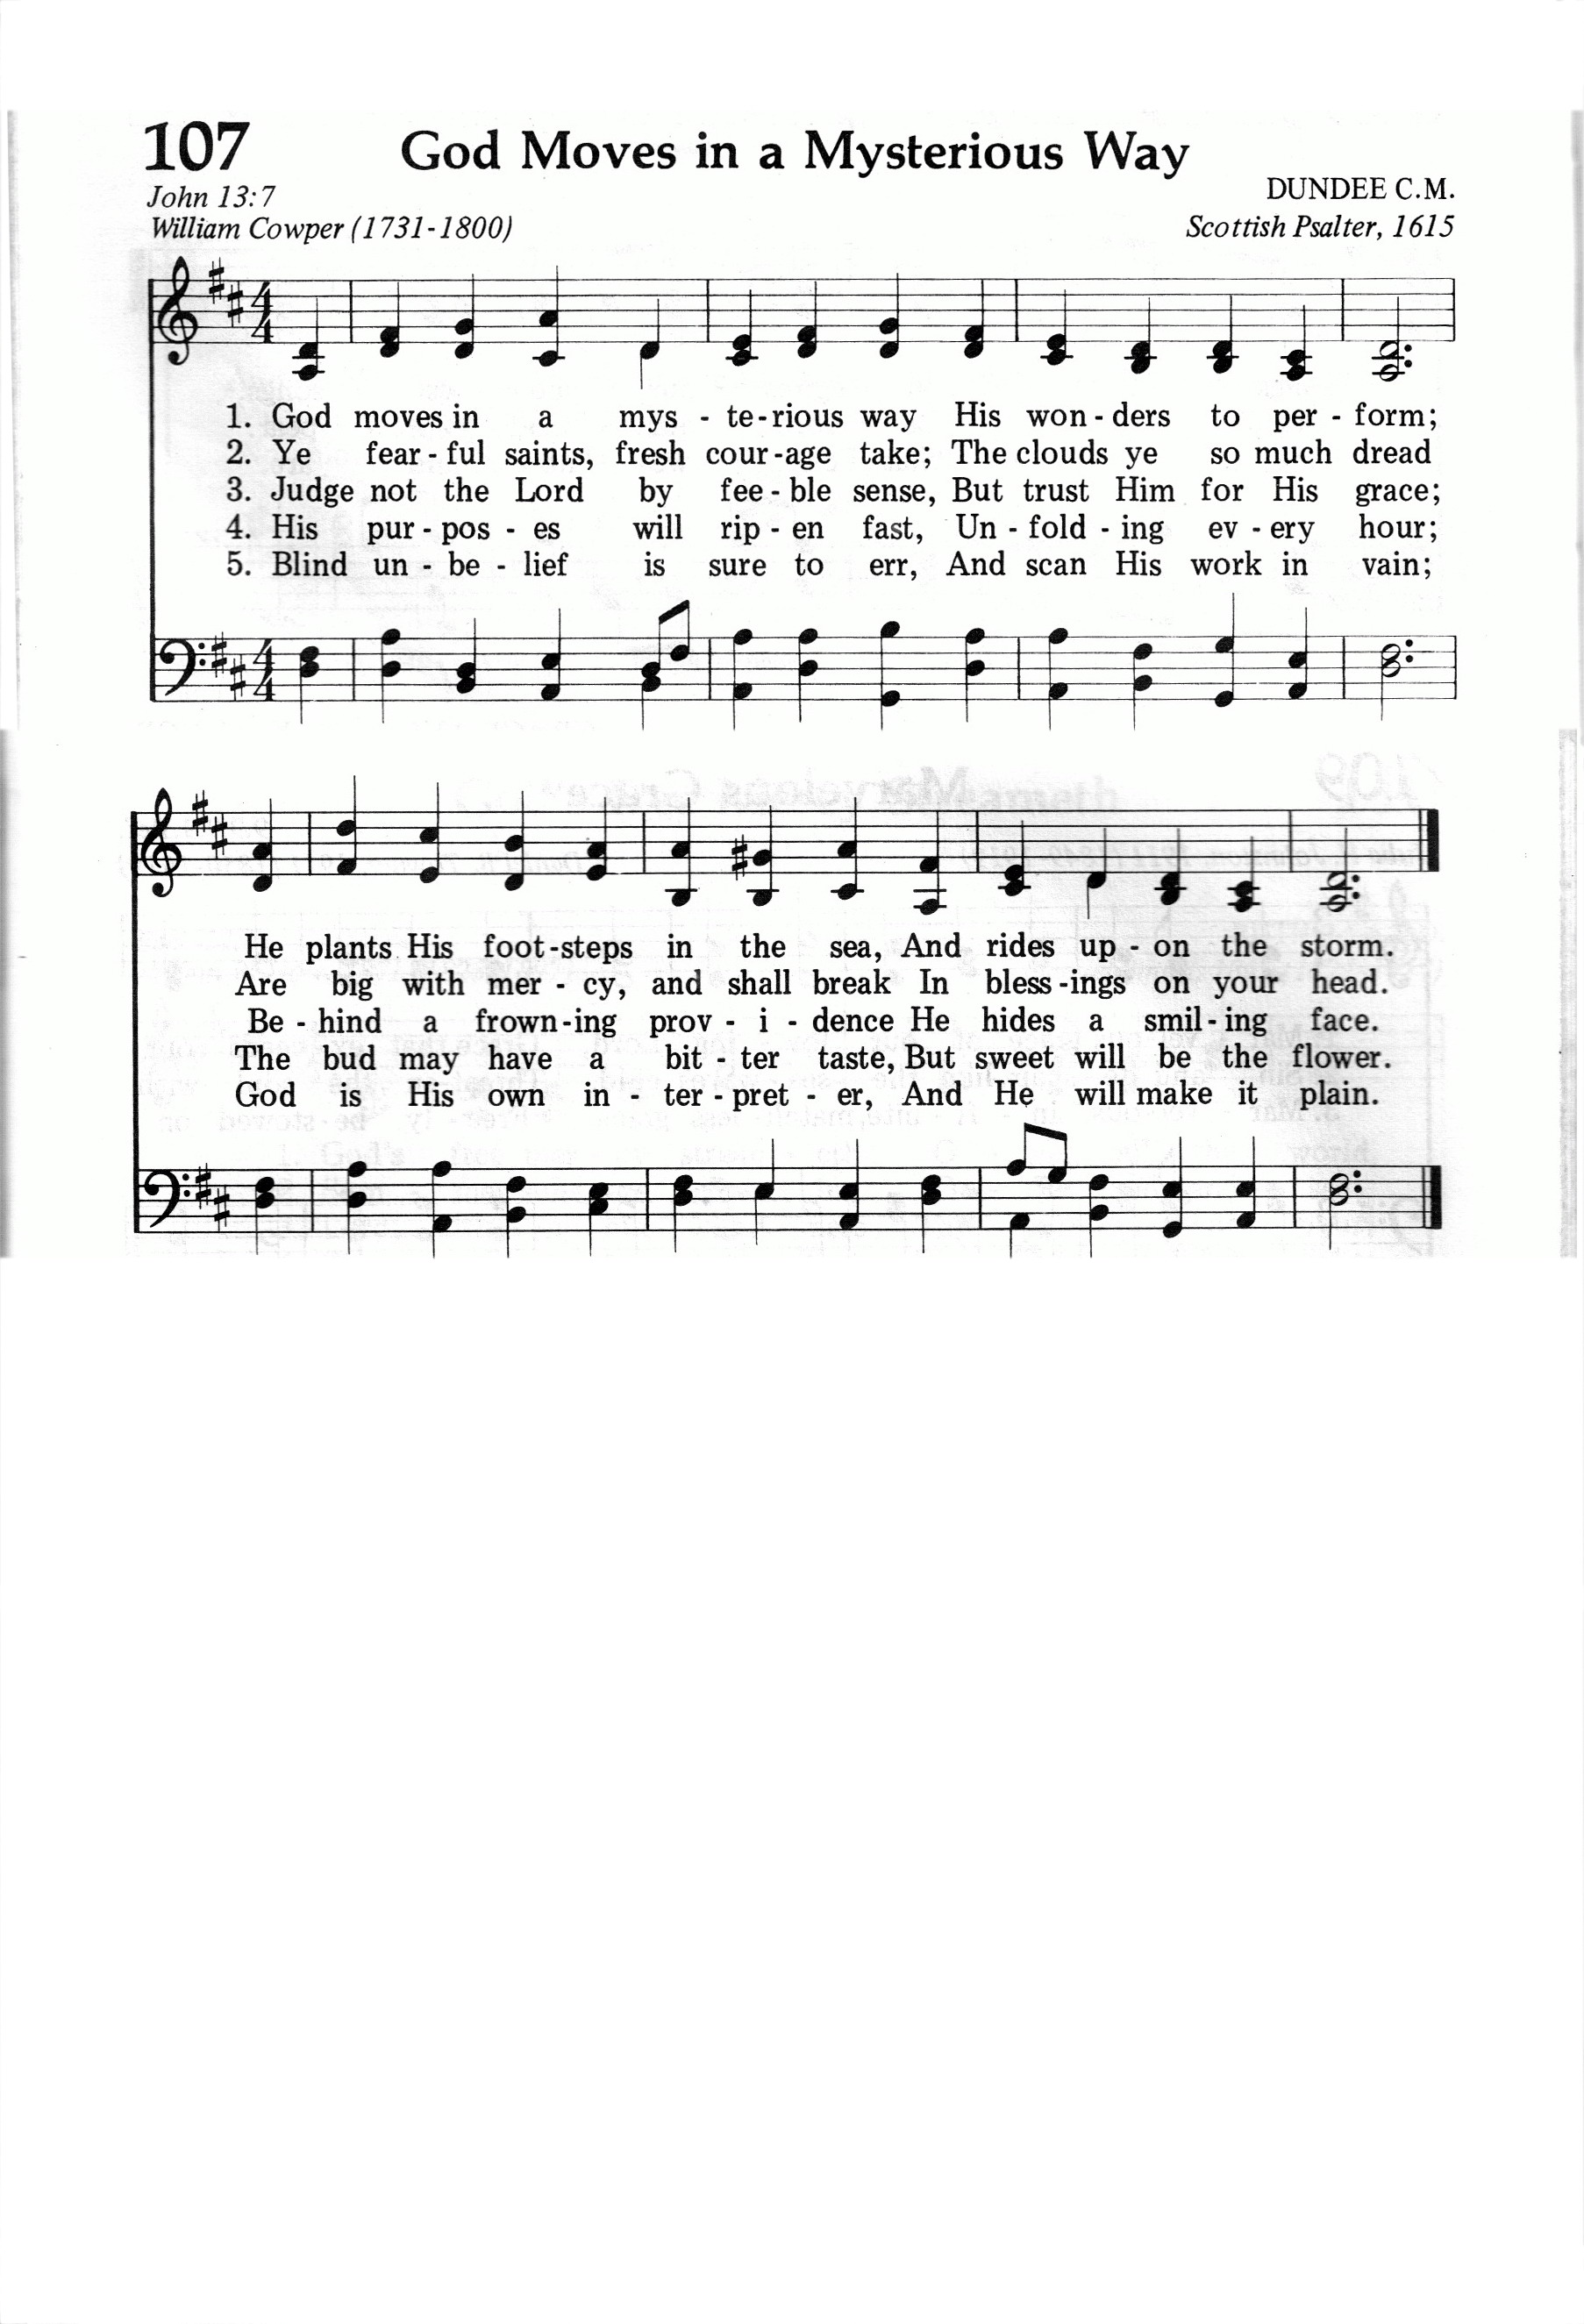 107.God Moves in a Mysterious Way-695HYMN